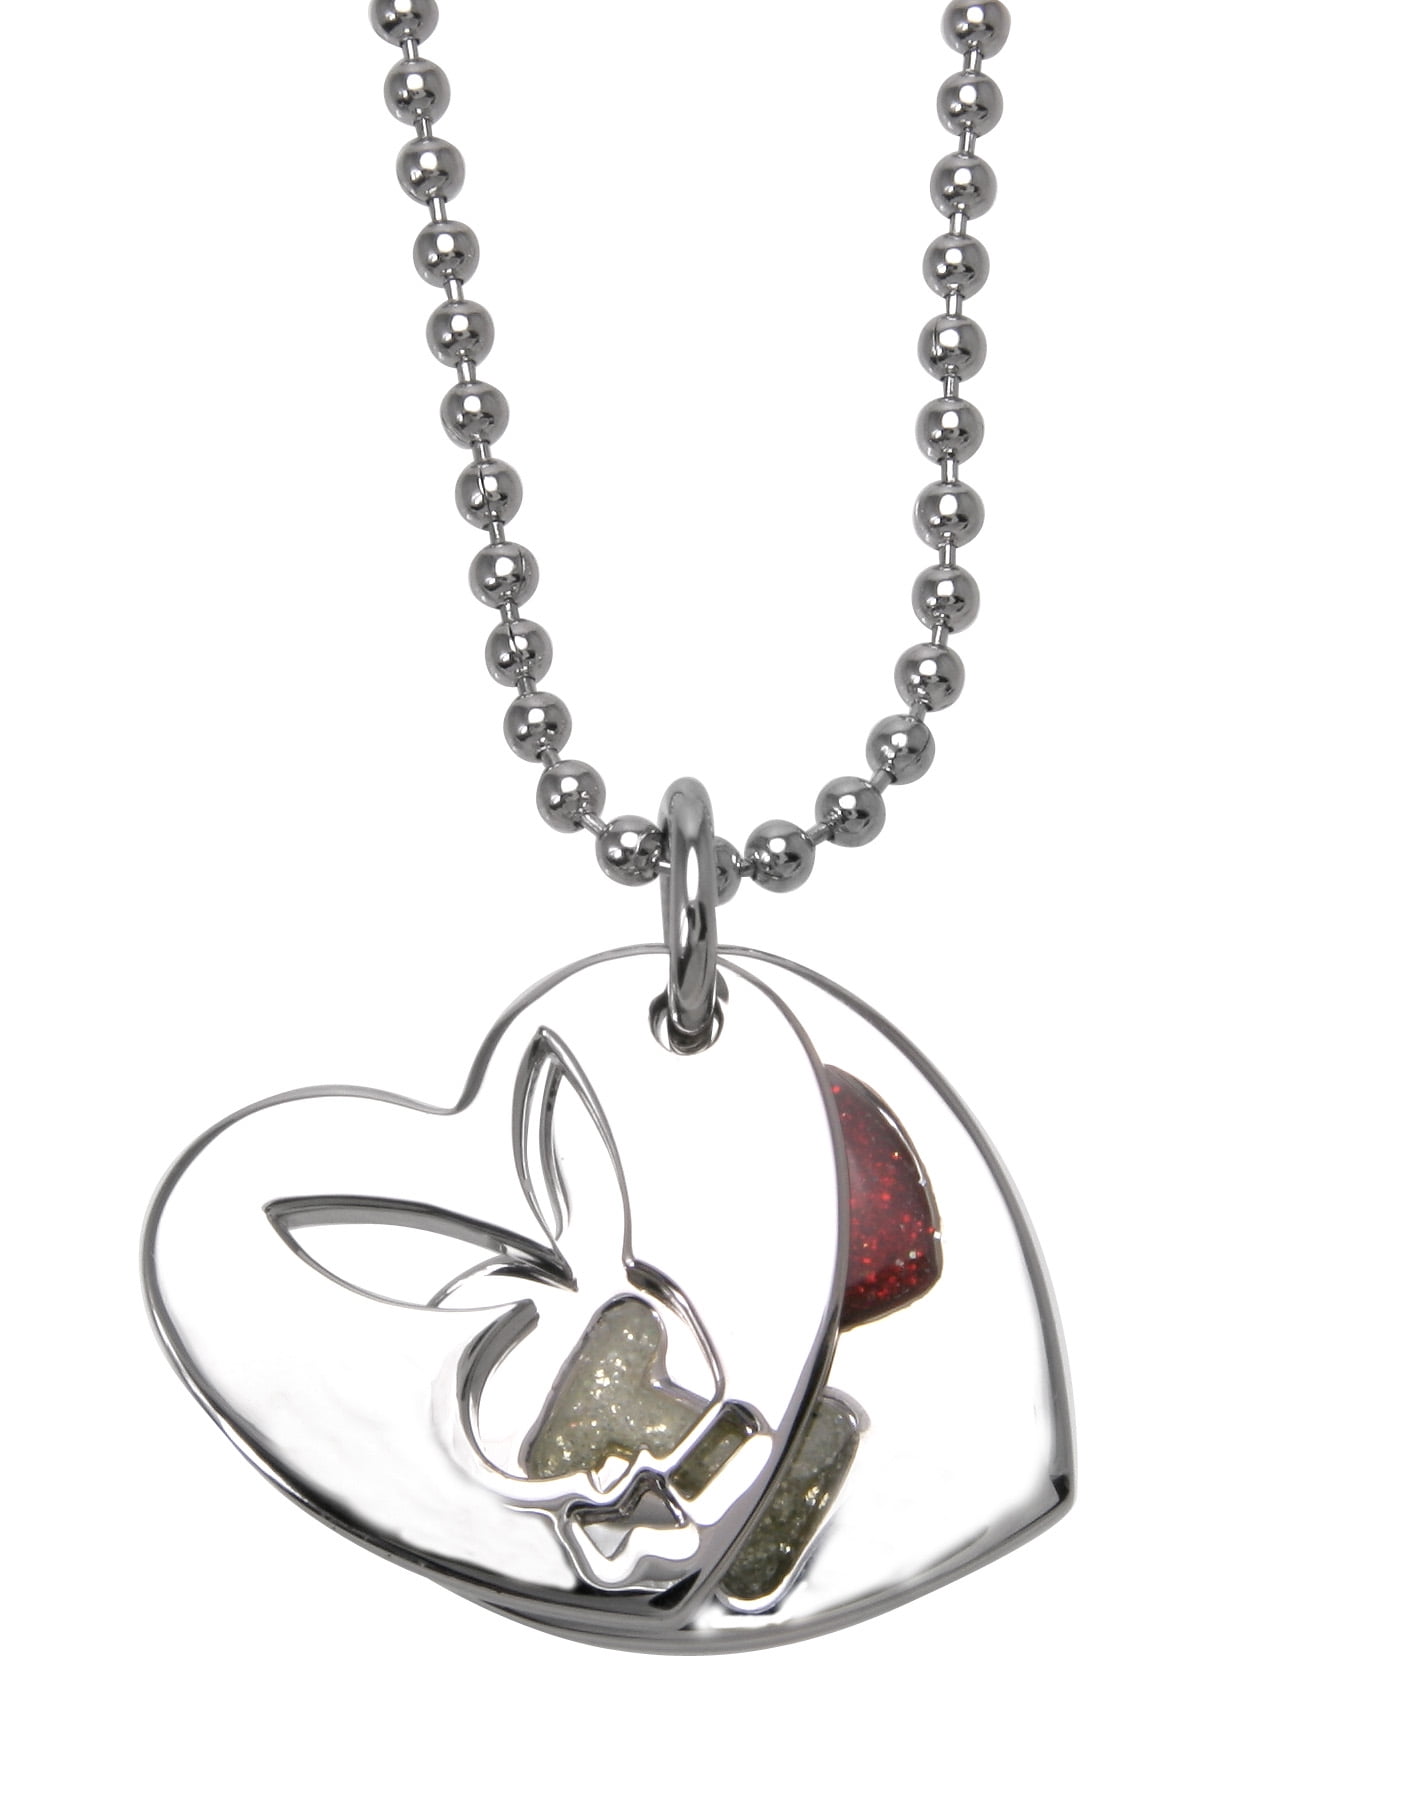 PLAYBOY, Jewelry, Playboy Necklace Bunny Pendant Floating Heart Charm Y2k  Nwt New With Tag In Box